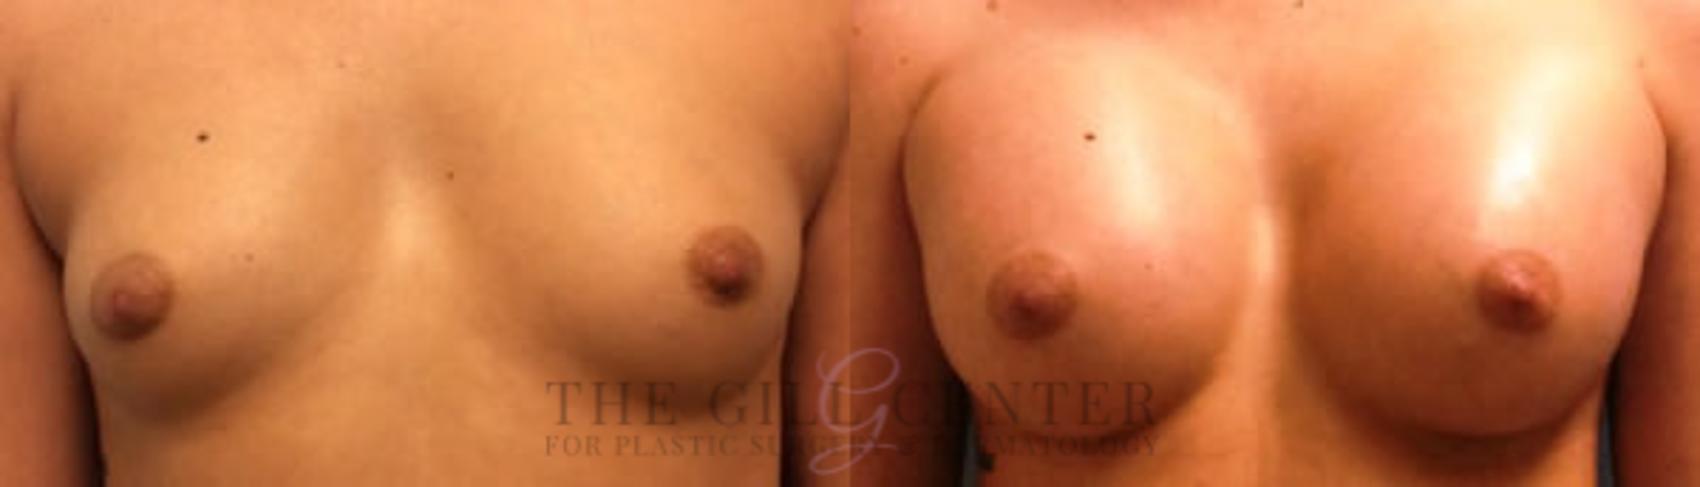 Breast Augmentation Case 45 Before & After Front | The Woodlands, TX | The Gill Center for Plastic Surgery and Dermatology